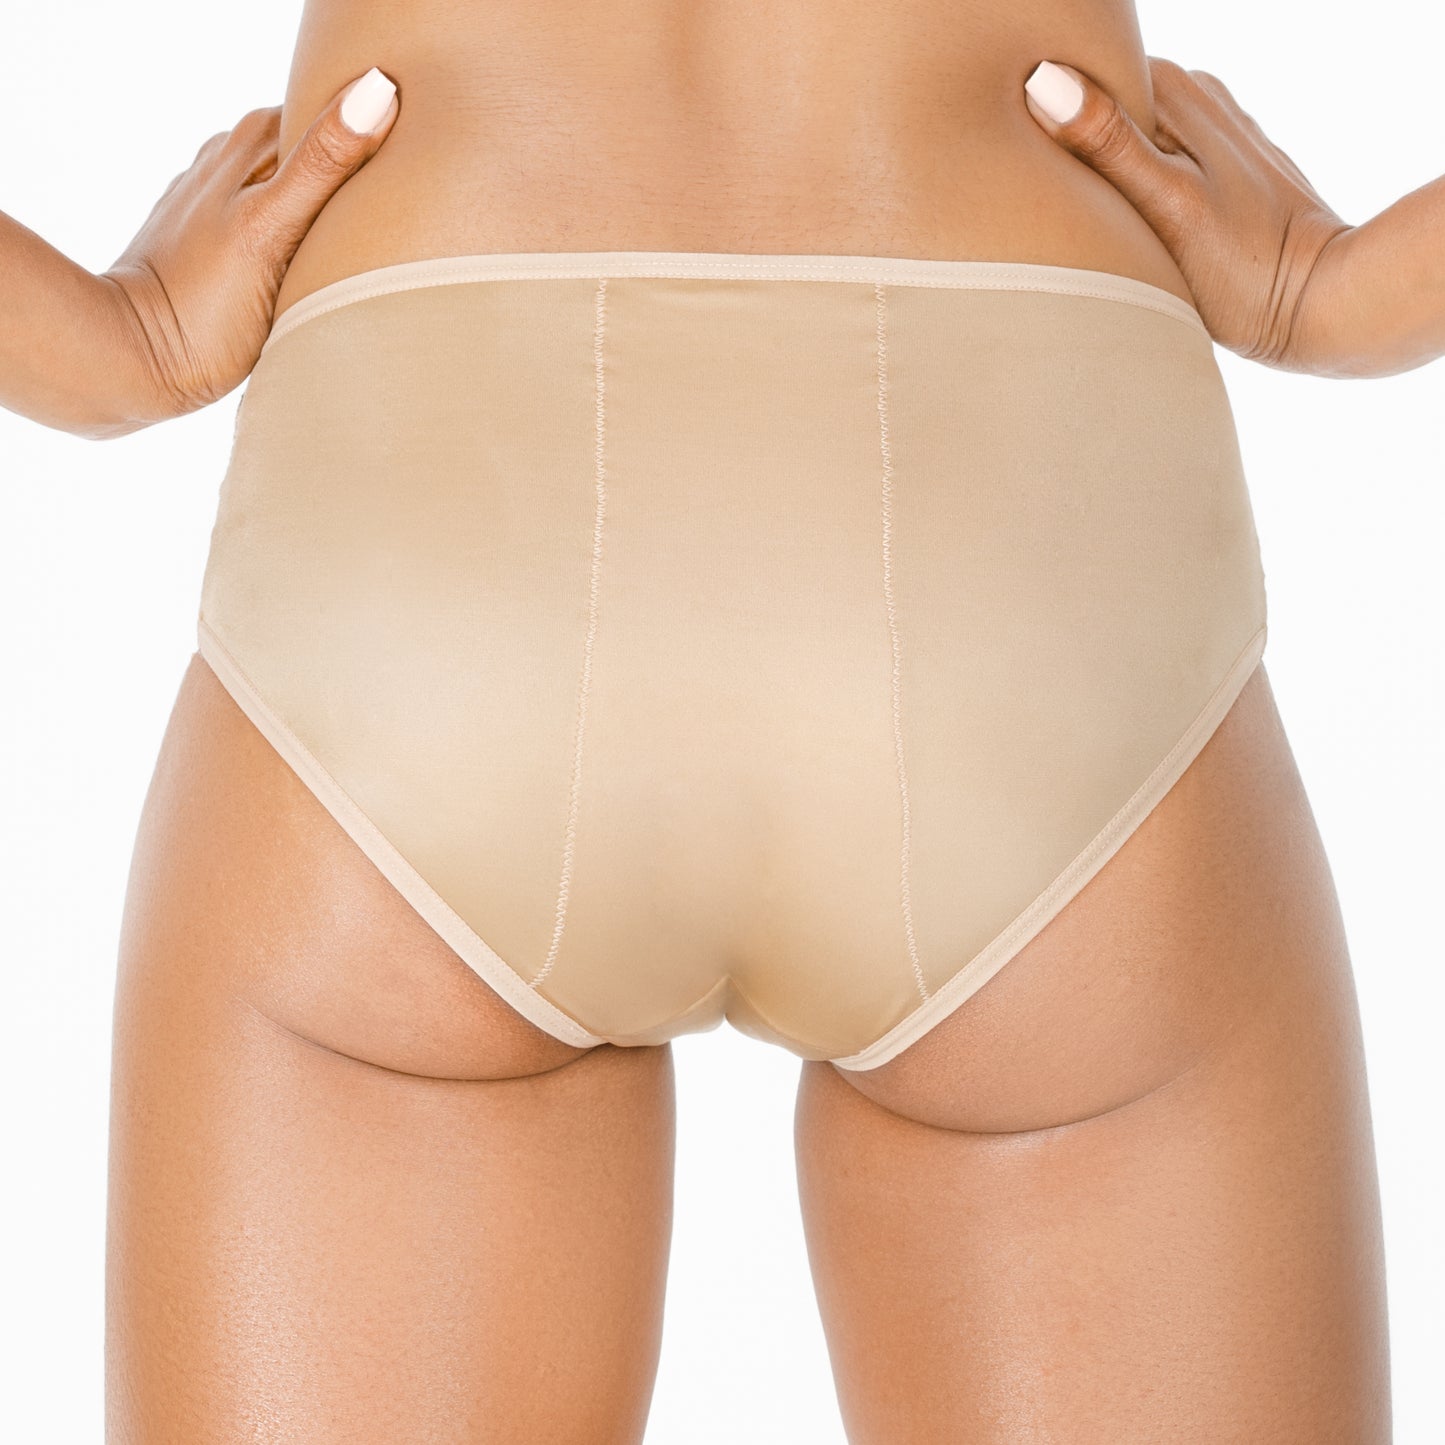 Hipster Period Undies for Winged Pads | Caramel Latte